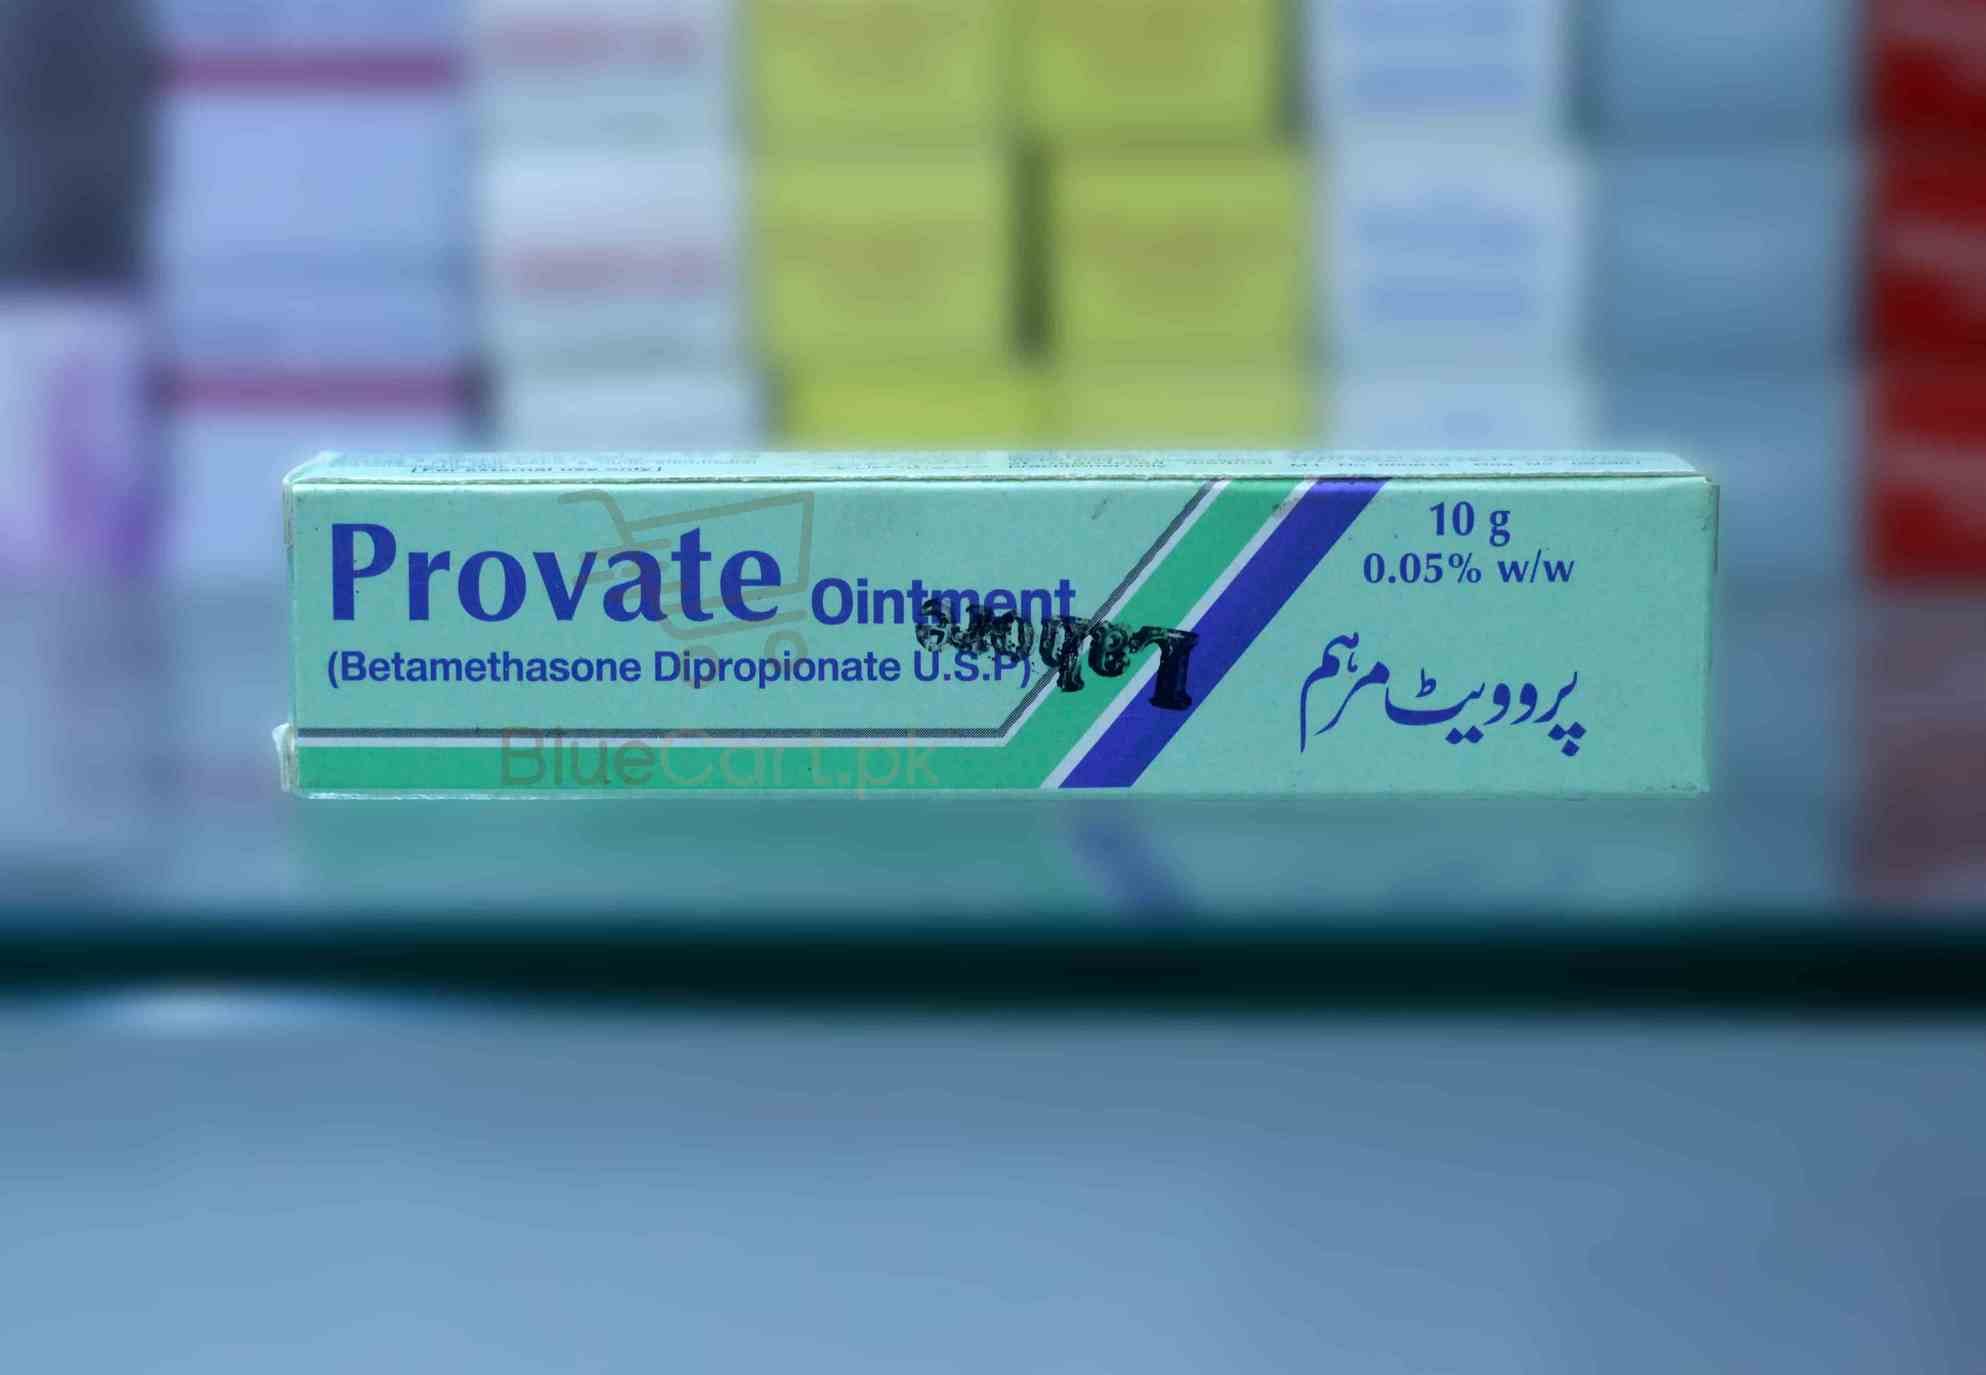 Provate Ointment